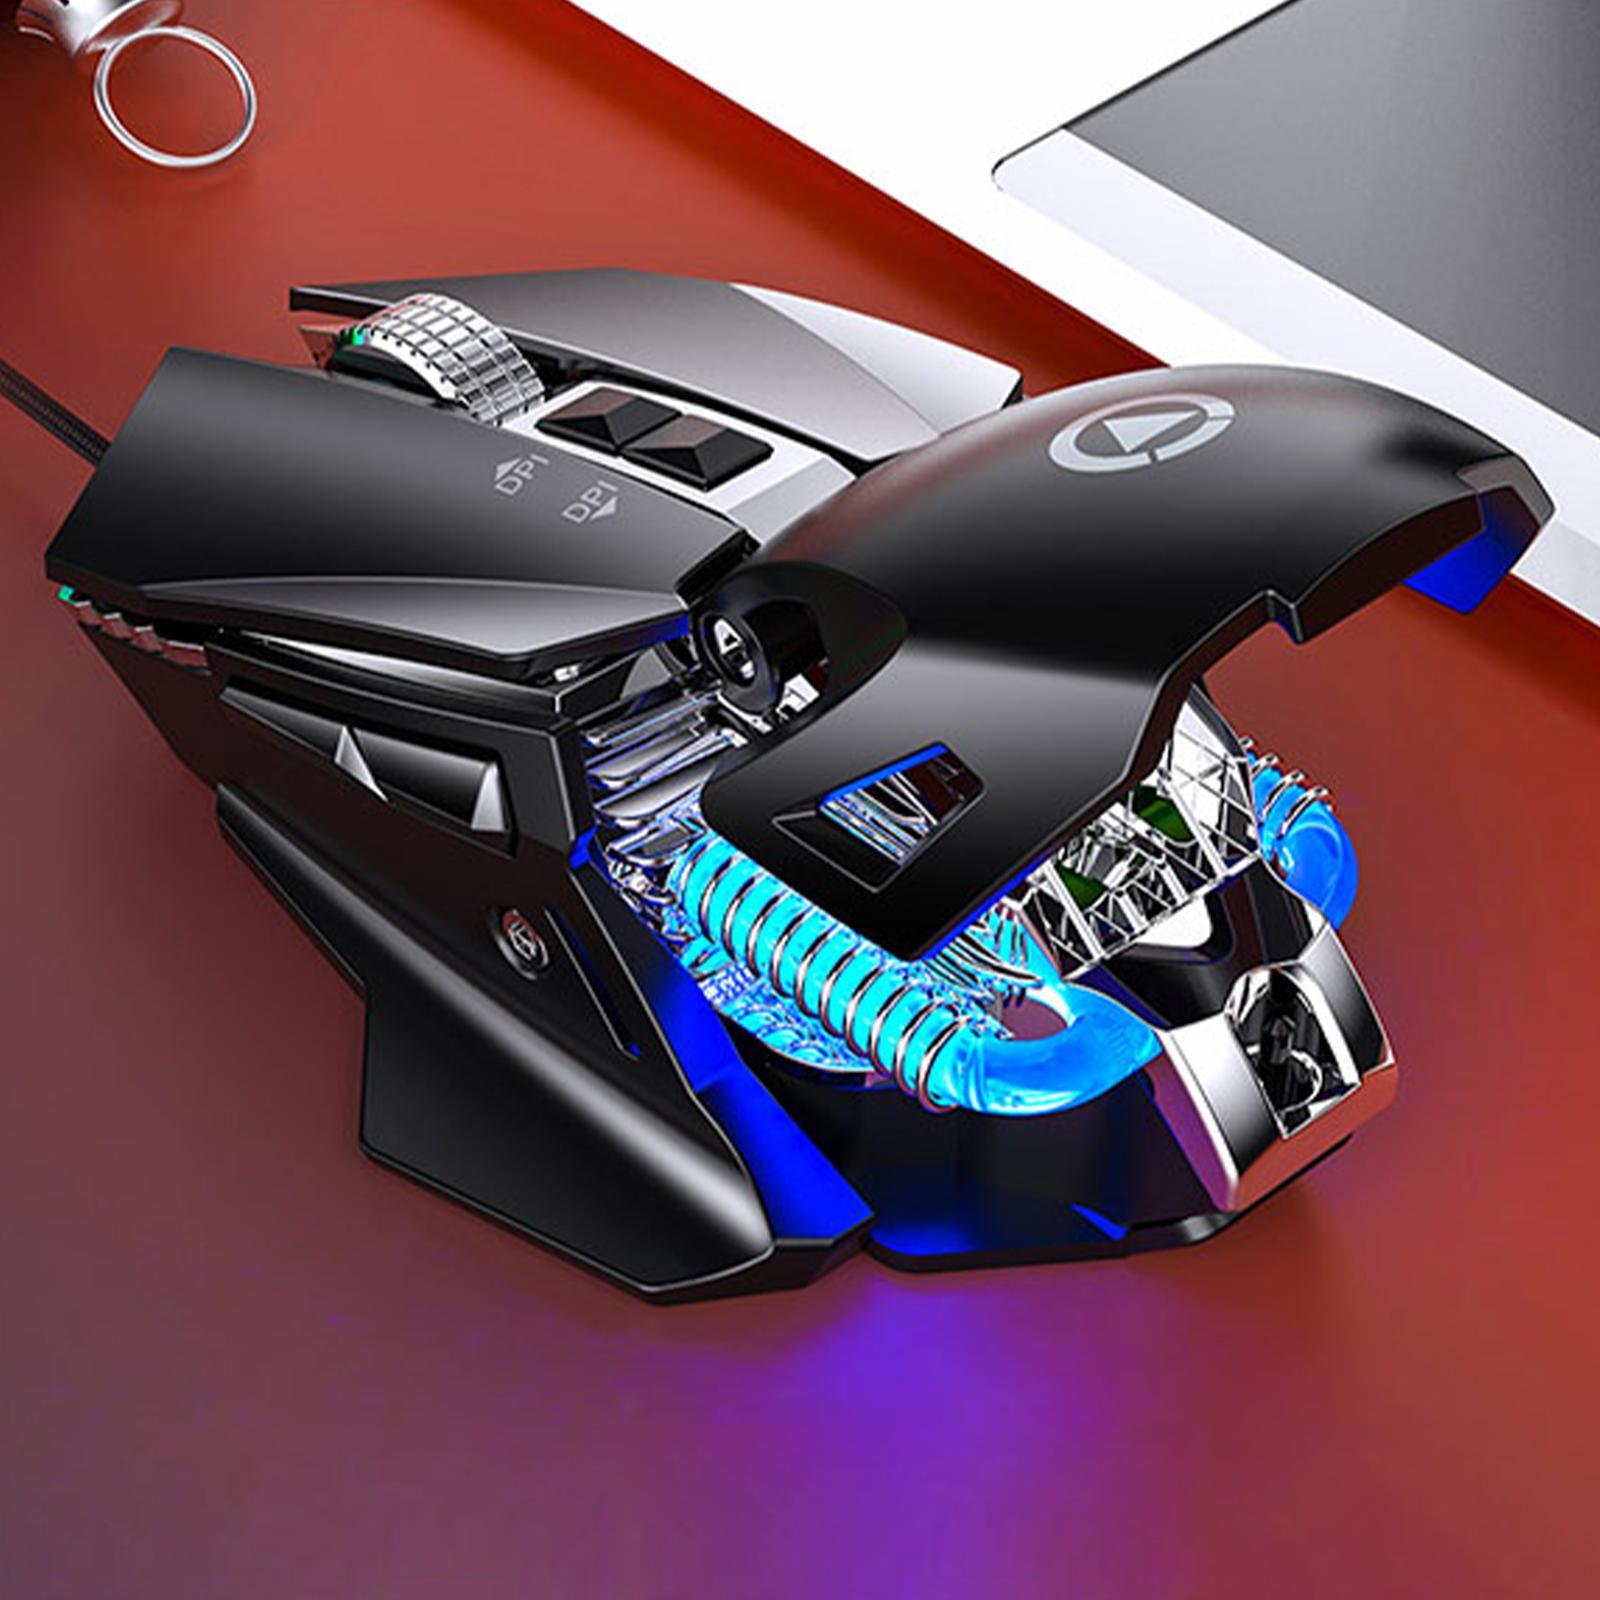 Mechanical Gaming Mouse Adjustable DPI up to 7200 Lighting Full Keys 7 Buttons